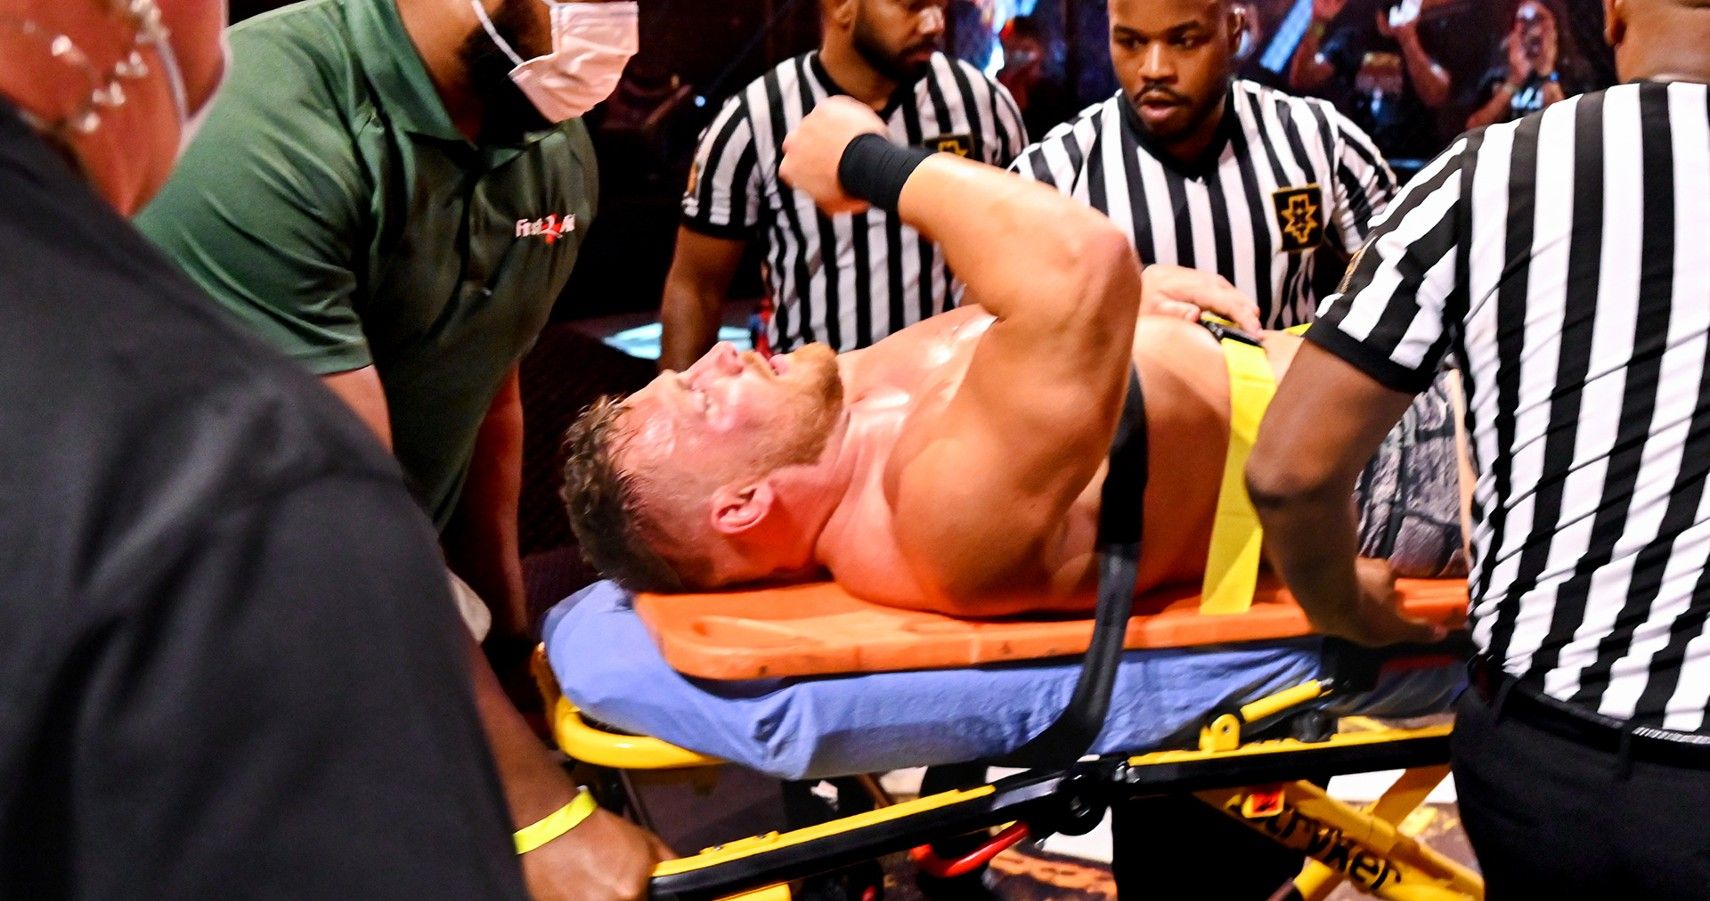 ridge holland being carried away on stretcher on the October 7, 2020 edition of NXT after being injured in a match with Oney Lorcan